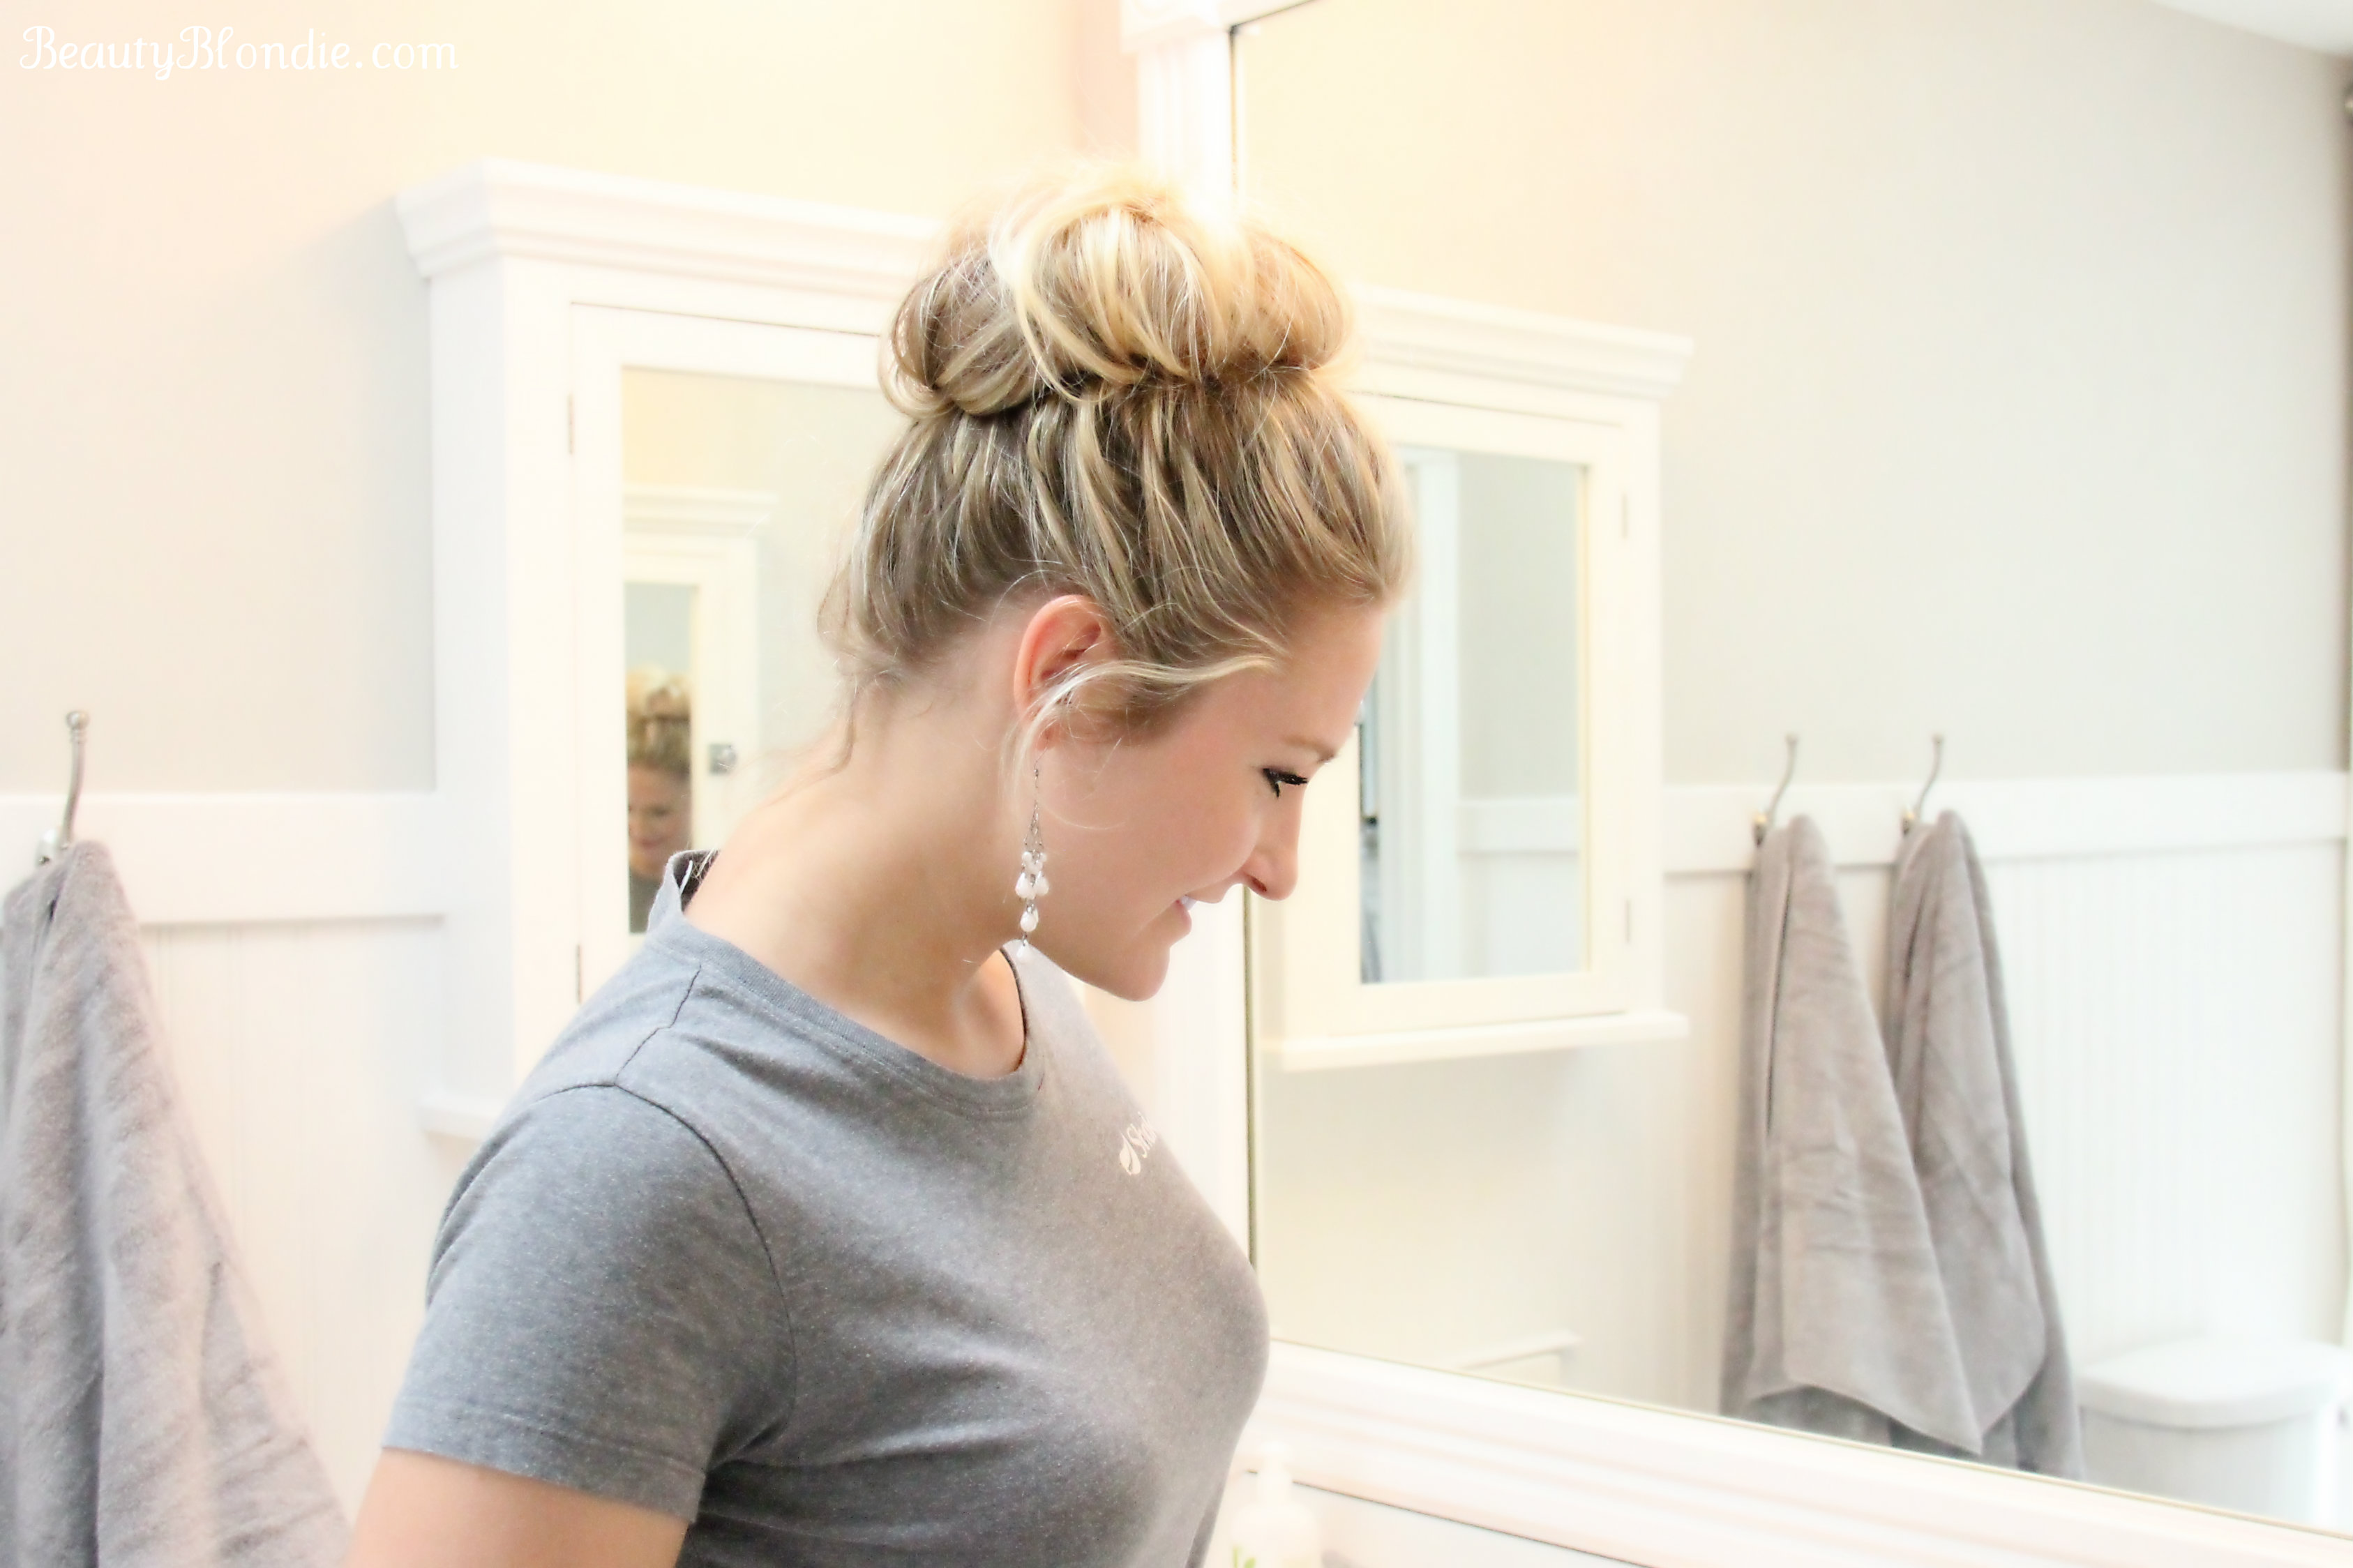 Get your Messy Bun Done in Less than 2 Minutes.